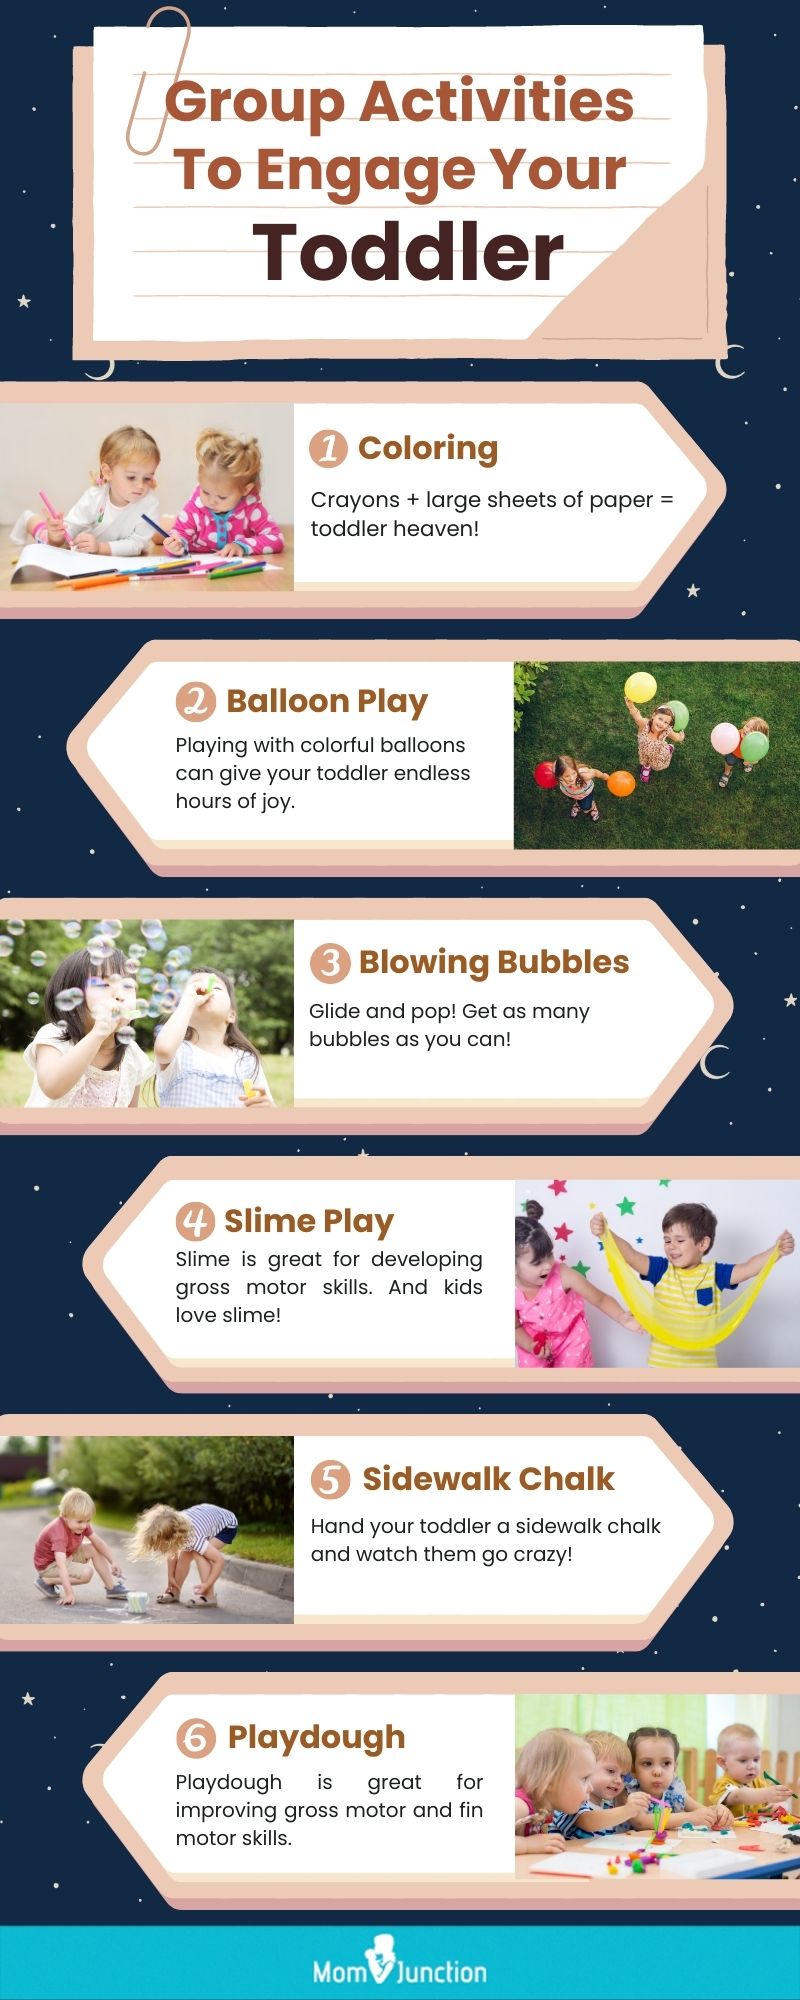 group activities to engage your toddler [infographic]